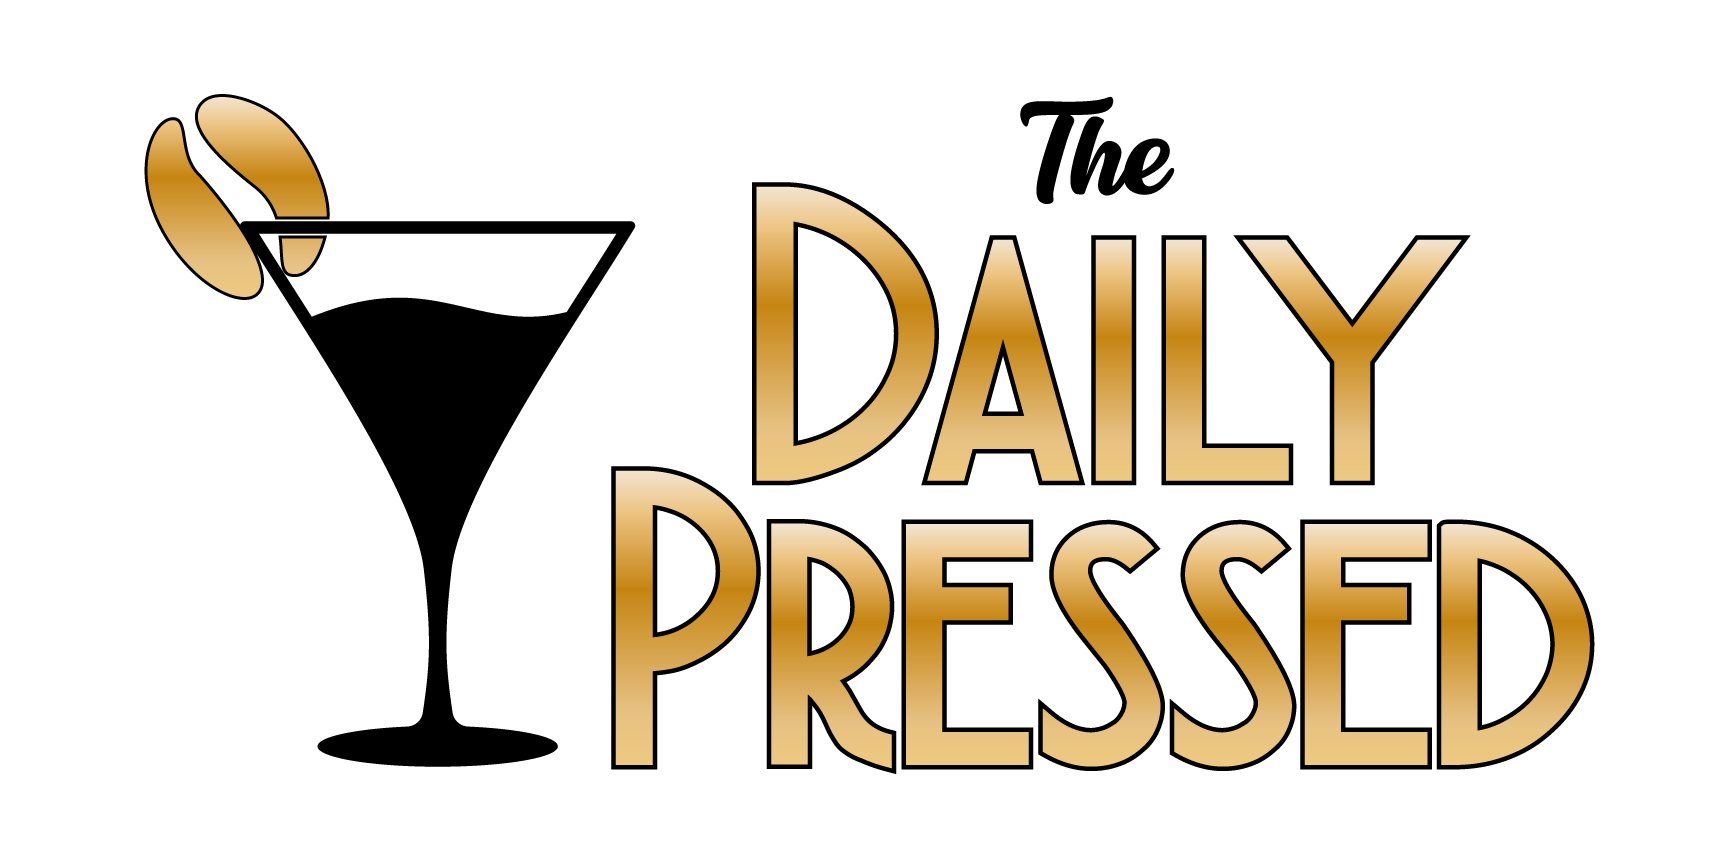 The Daily Pressed